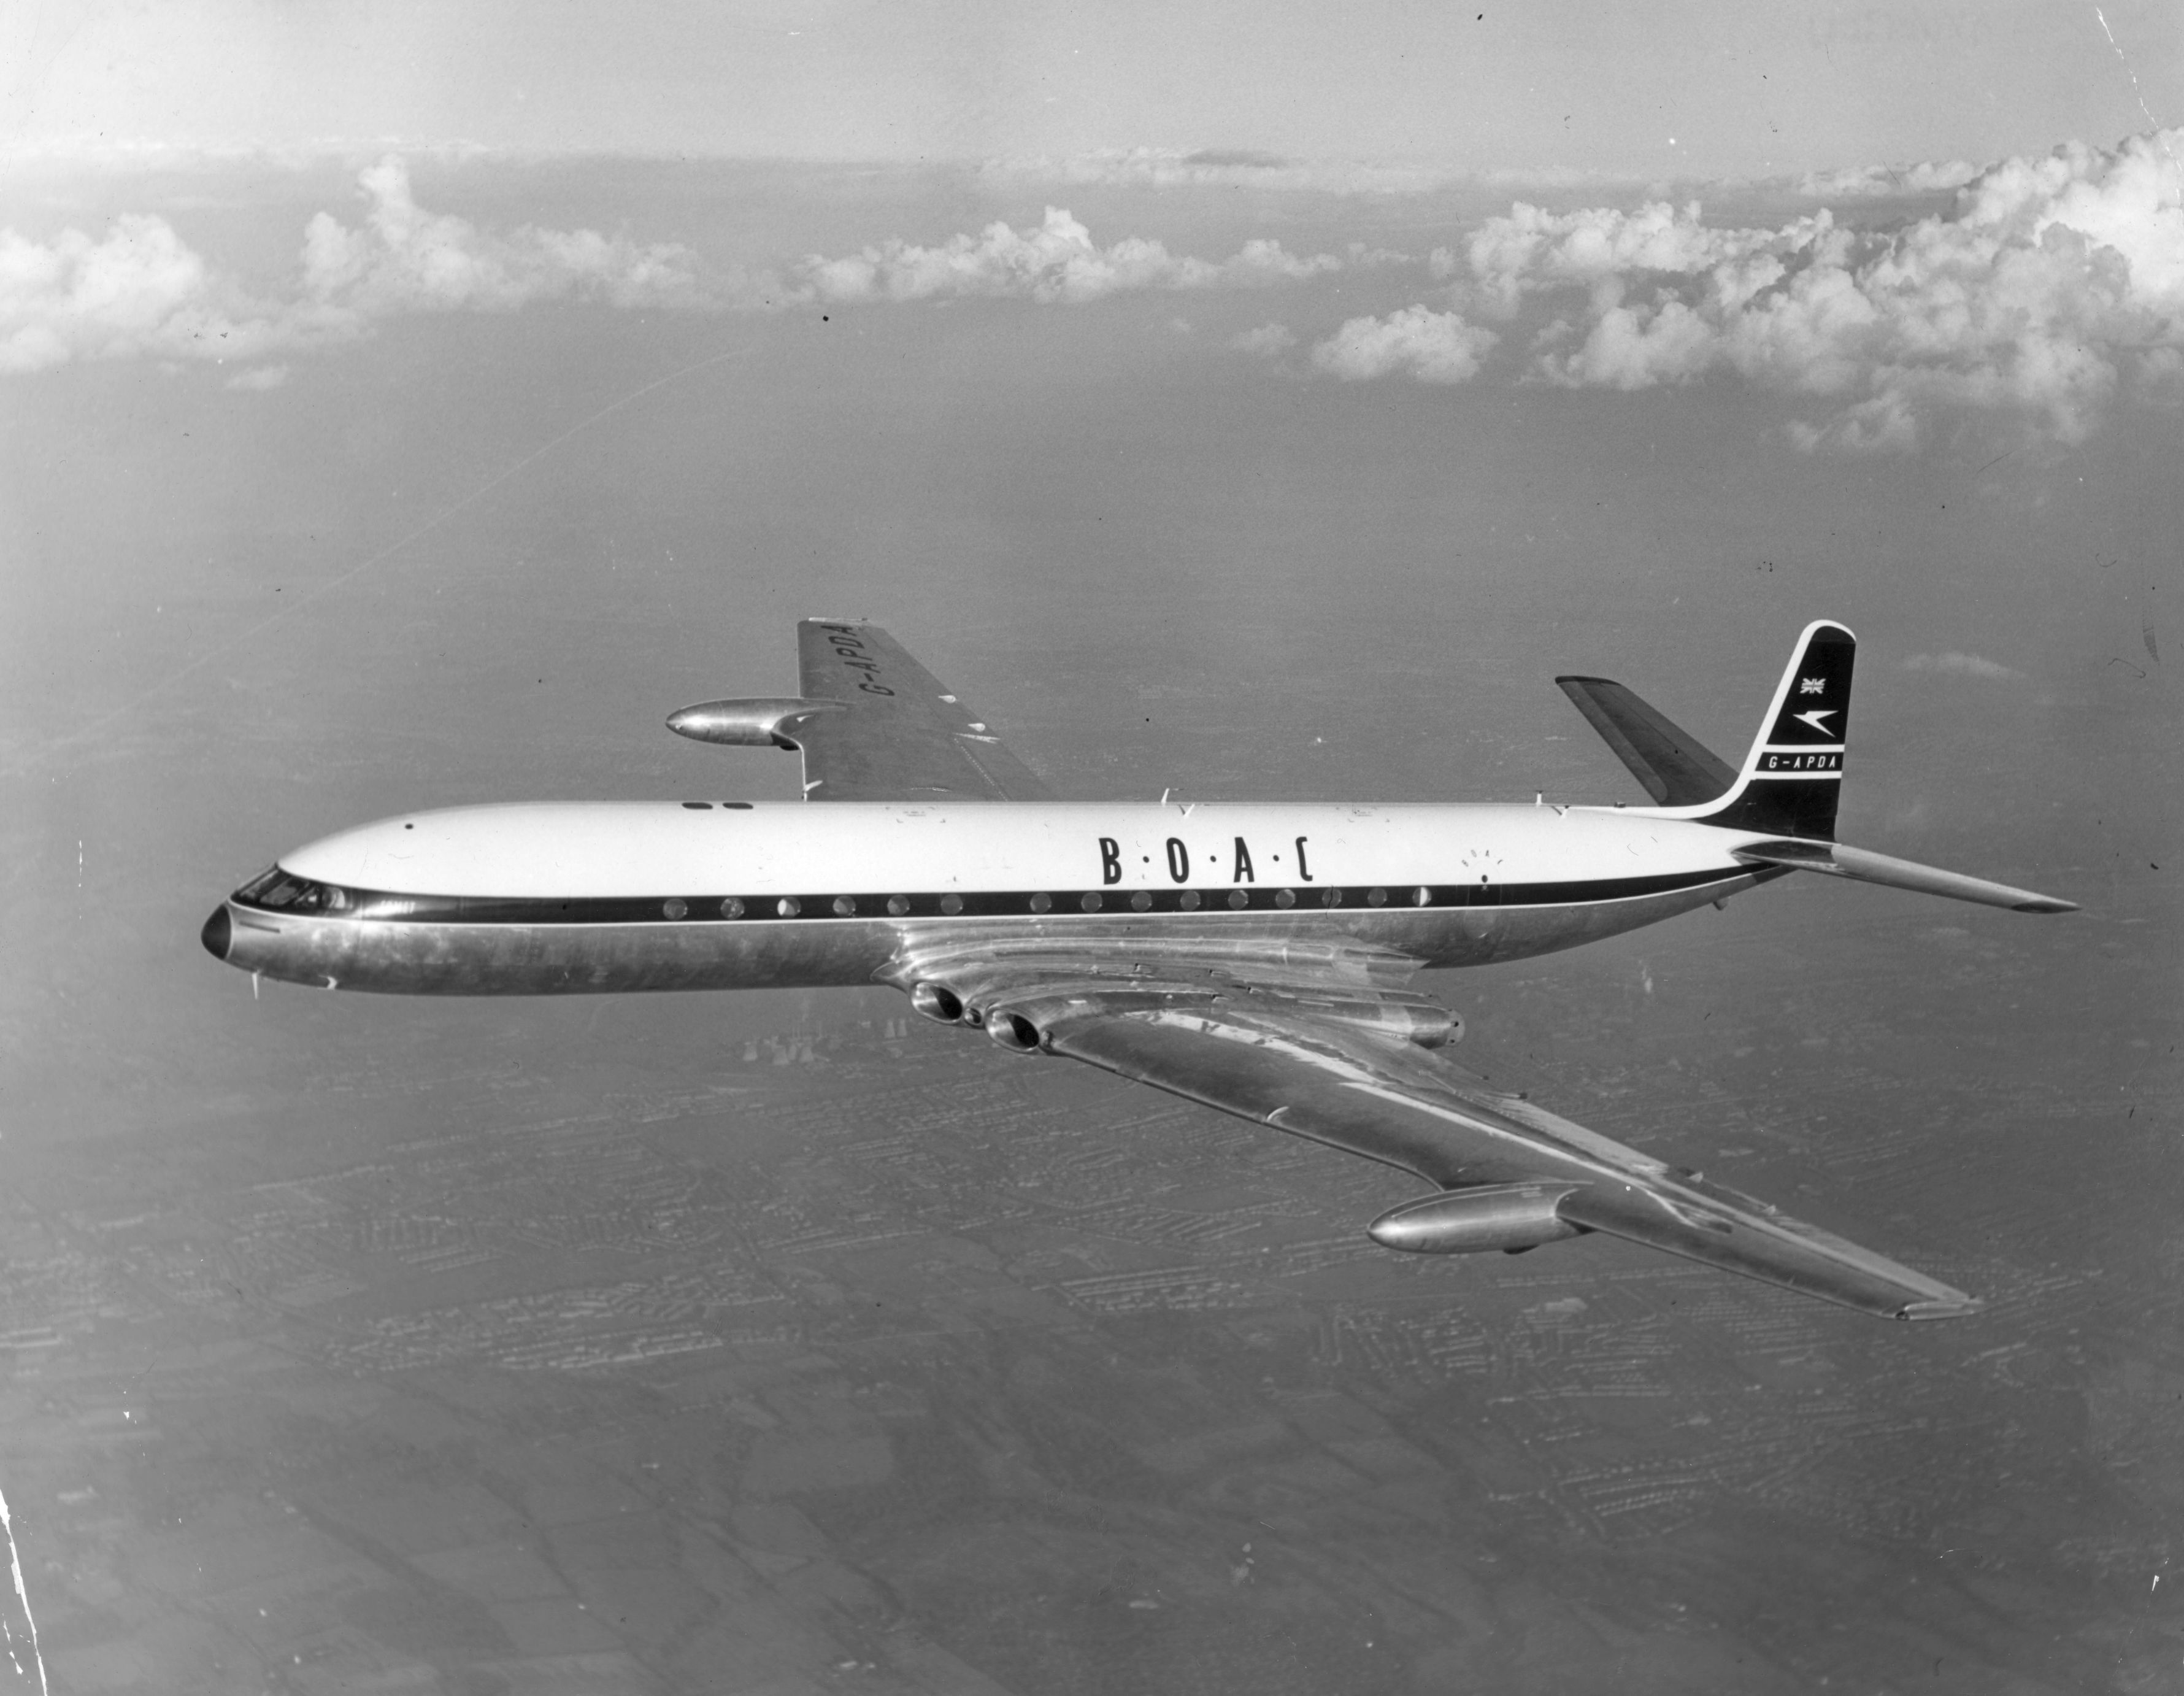 The BOAC Comet Made The 1st Commercial Transatlantic Jet Flight 64 Years Ago